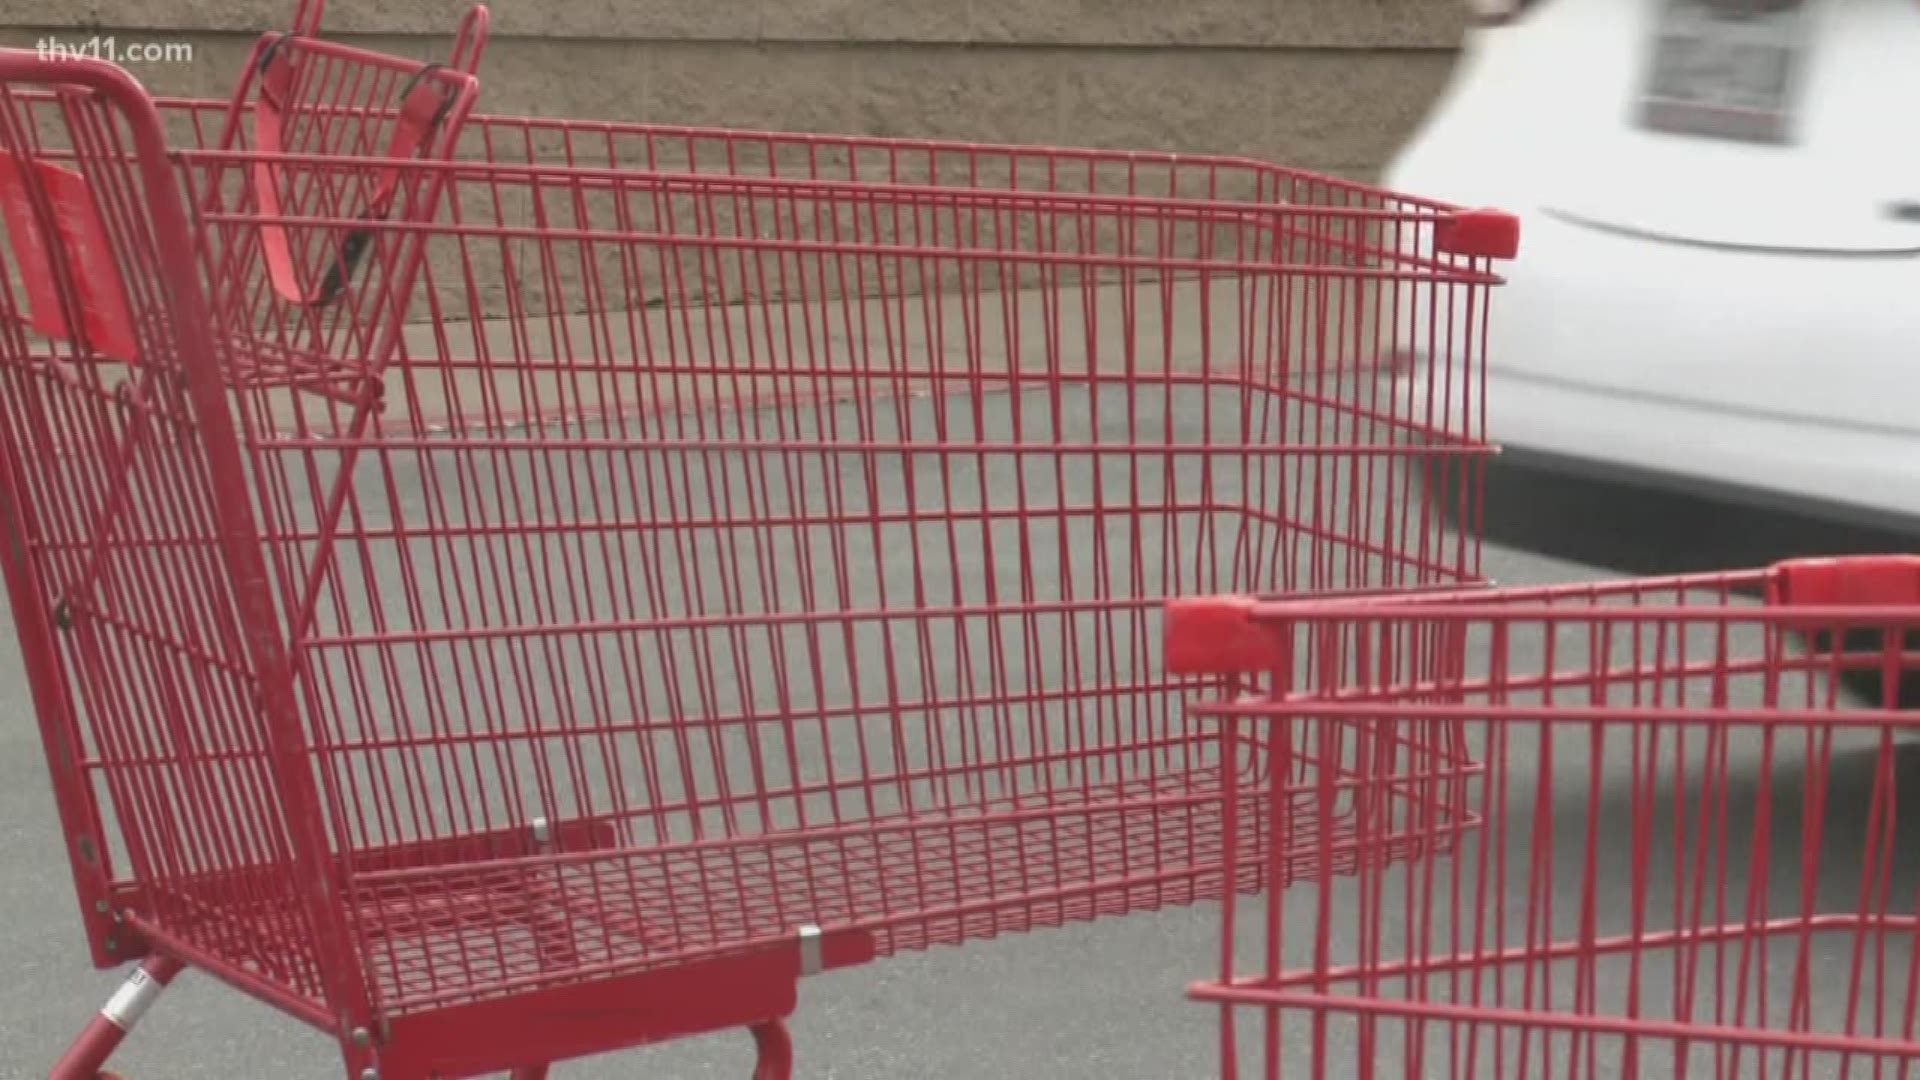 With no end in sight to the shutdown, food stamp benefits will go out early in Arkansas.